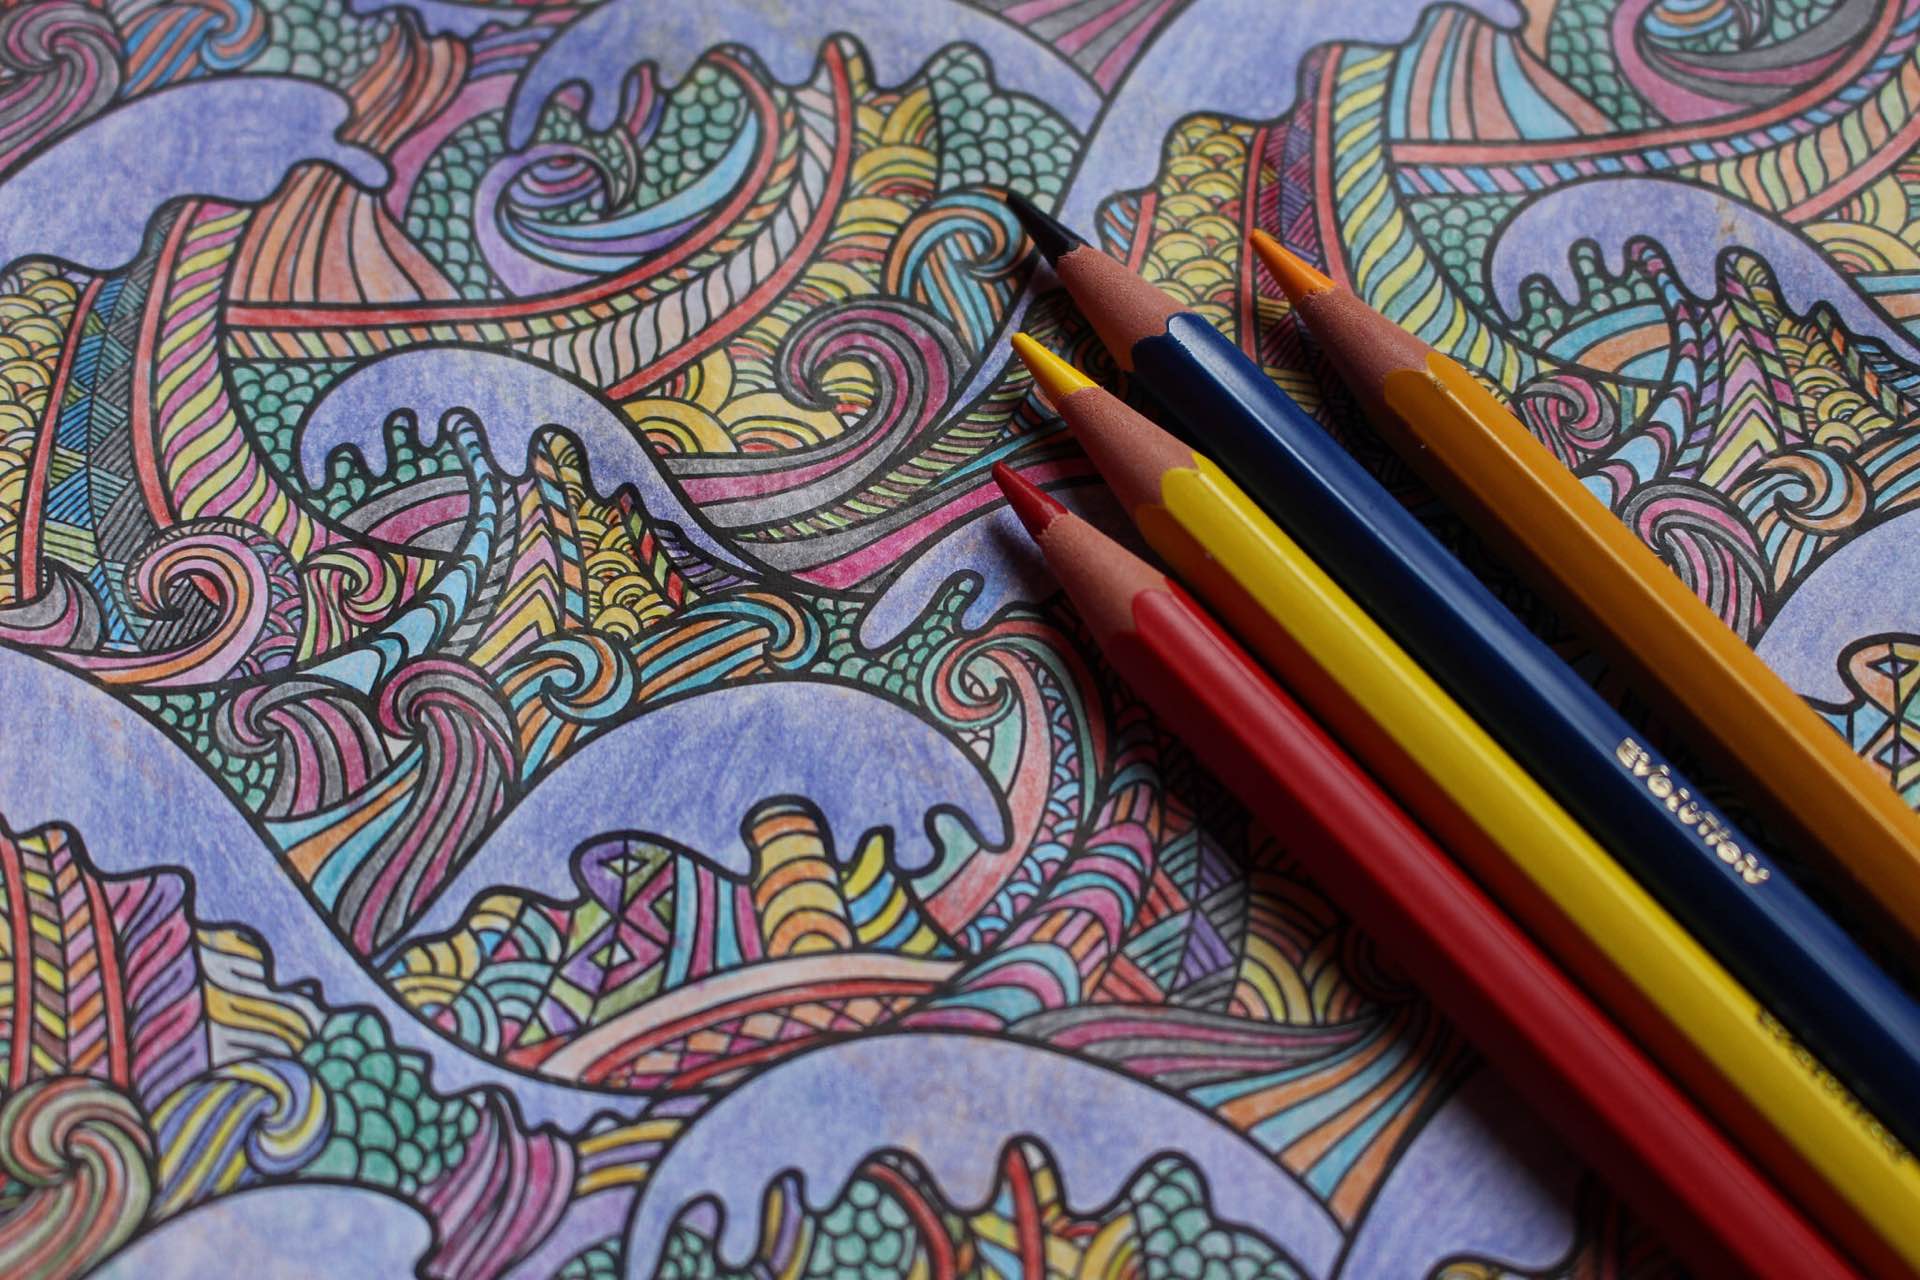 Coloring Book For Adults Titled 'Doodle Invasion' by Kerby Rosanes